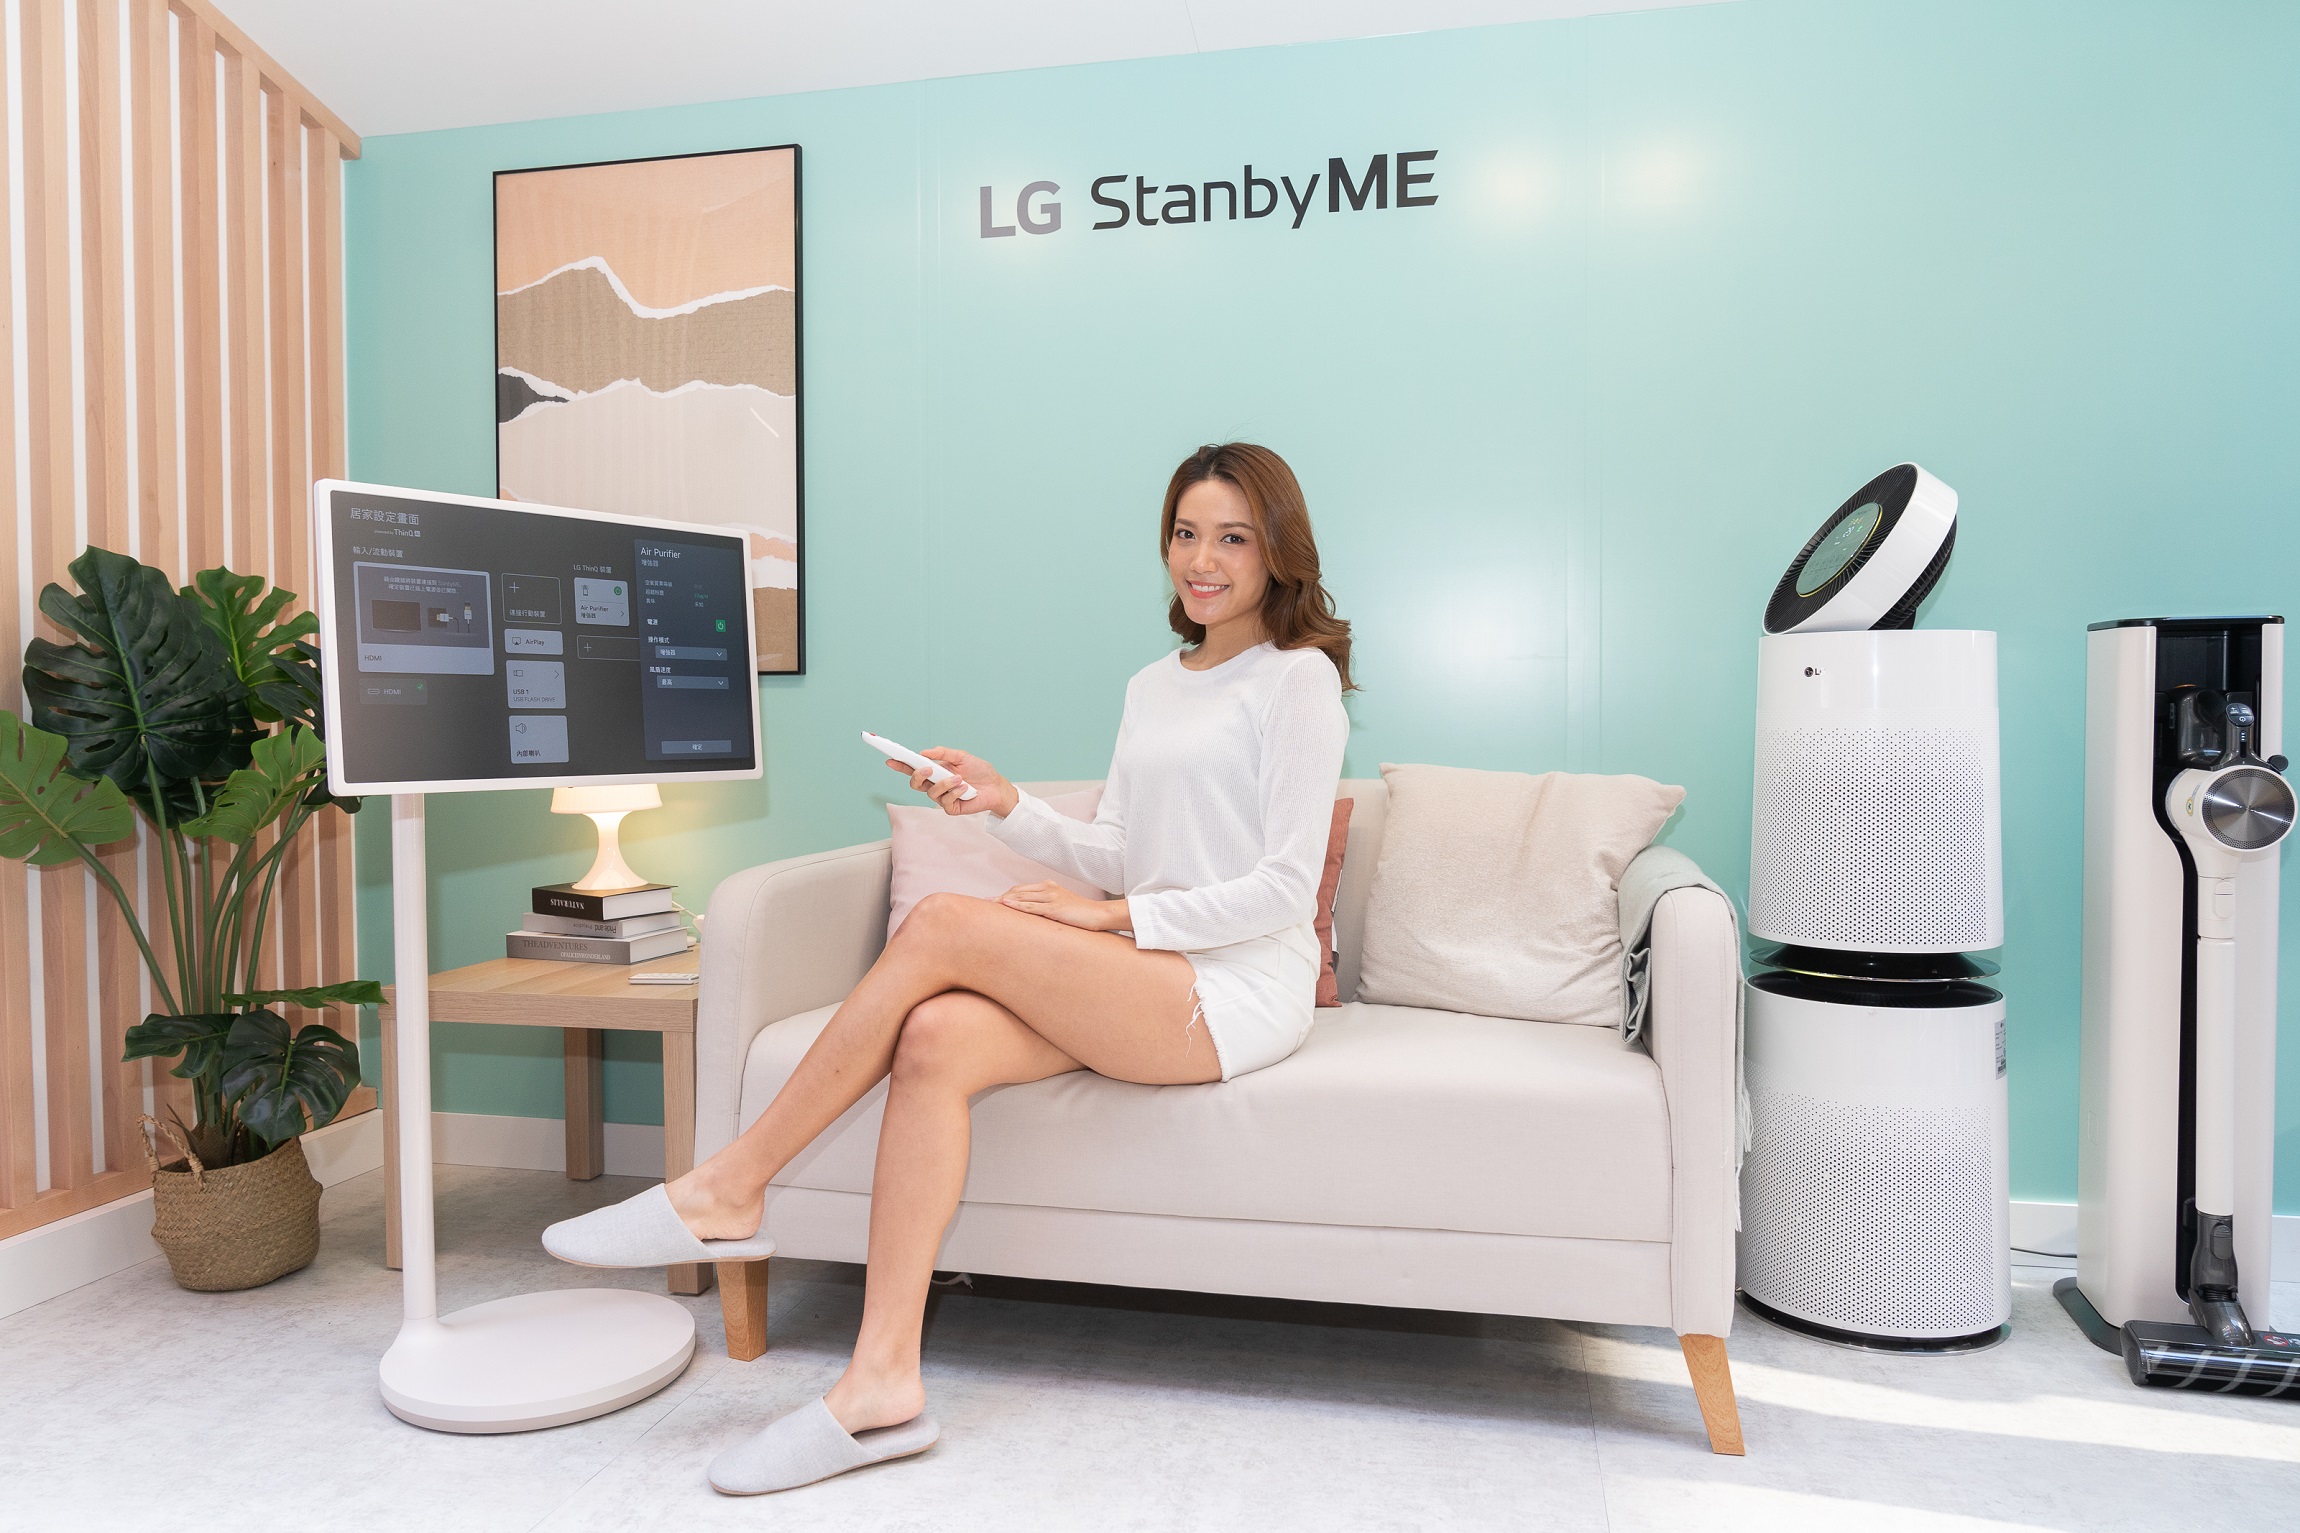 The launch event’s Living Room Zone with a woman using LG StanbyME on the sofa next to LG’s air purifier and CordZero vacuum.